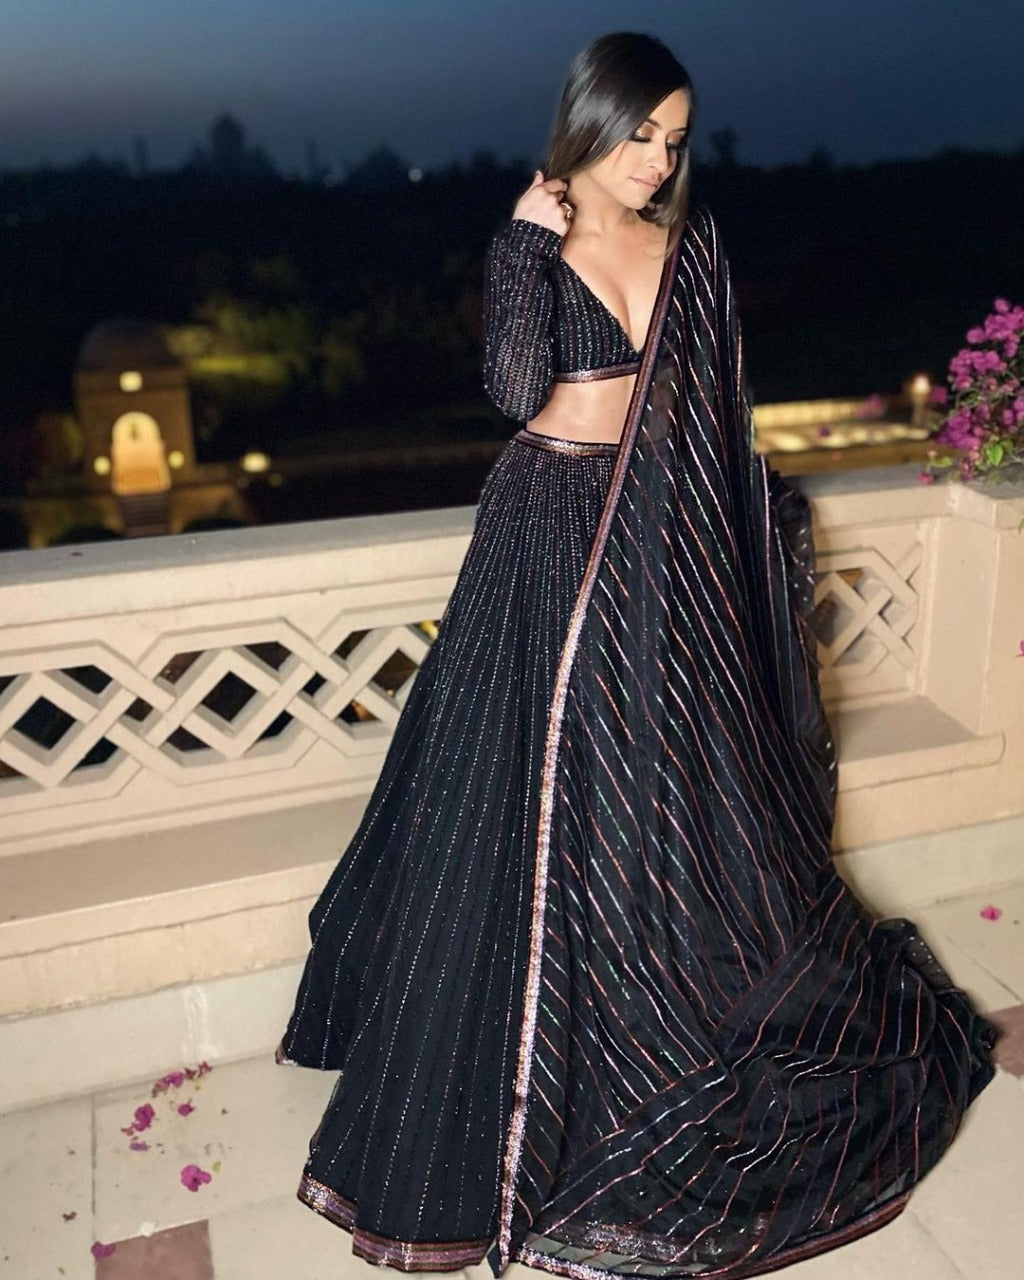 Learn the style hack to slay in Sabyasachi floral lehengas the Janhvi  Kapoor, Anushka Sharma and